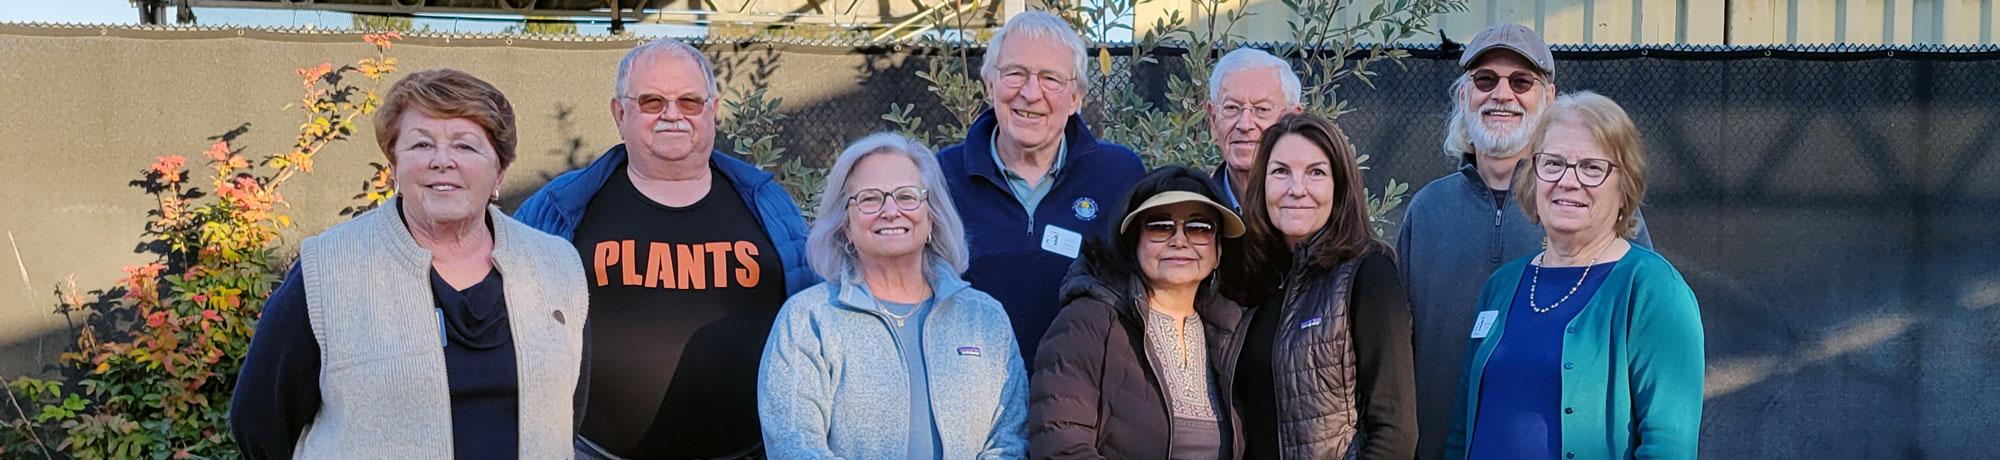 Board members of the Friends of the UC Davis Arboretum and Public Garden